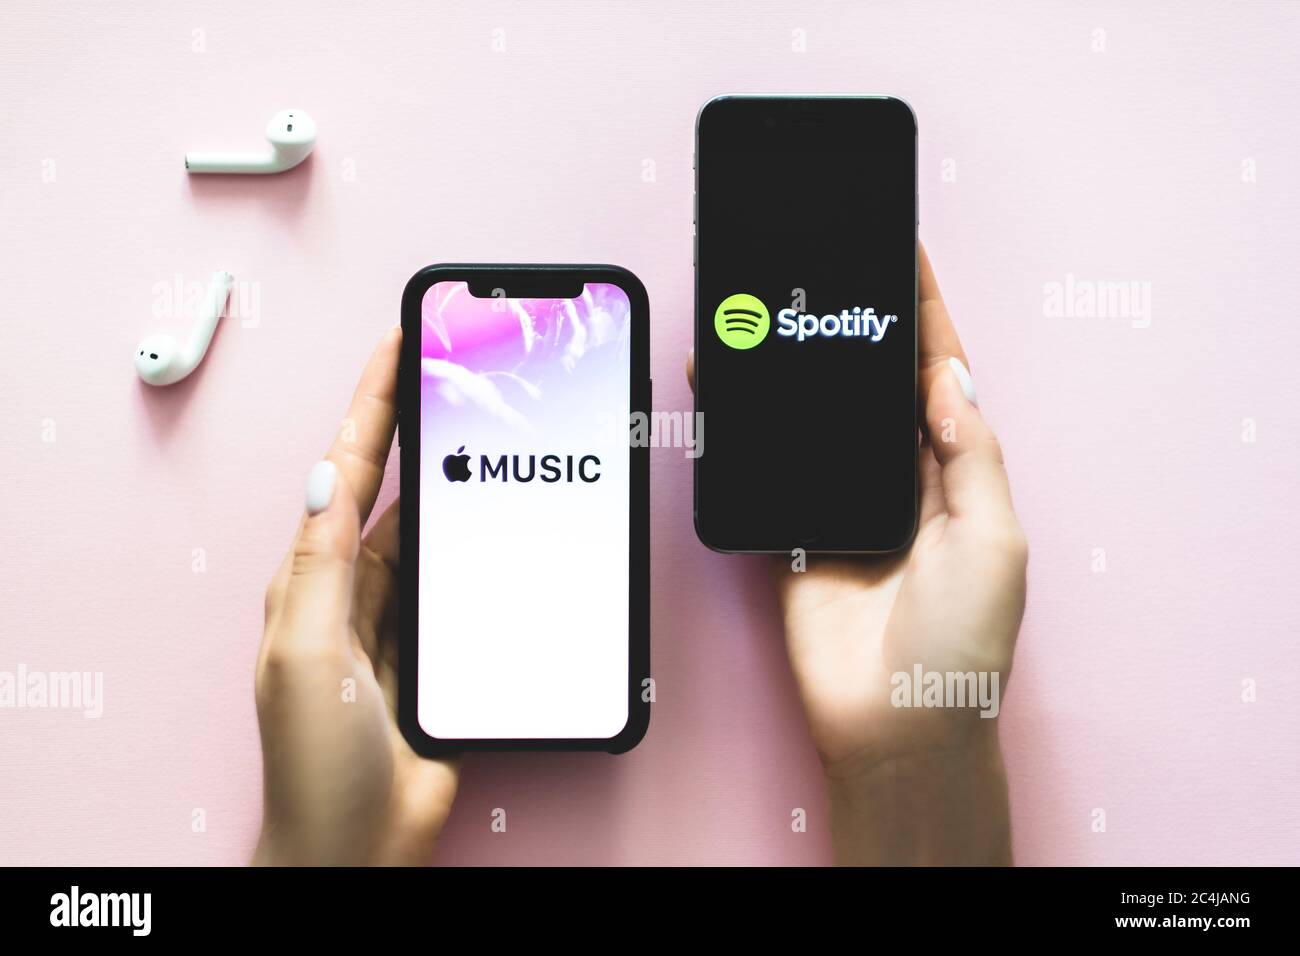 hands holding iPhone X with Screen shot of Apple music app and Spotify  Stock Photo - Alamy